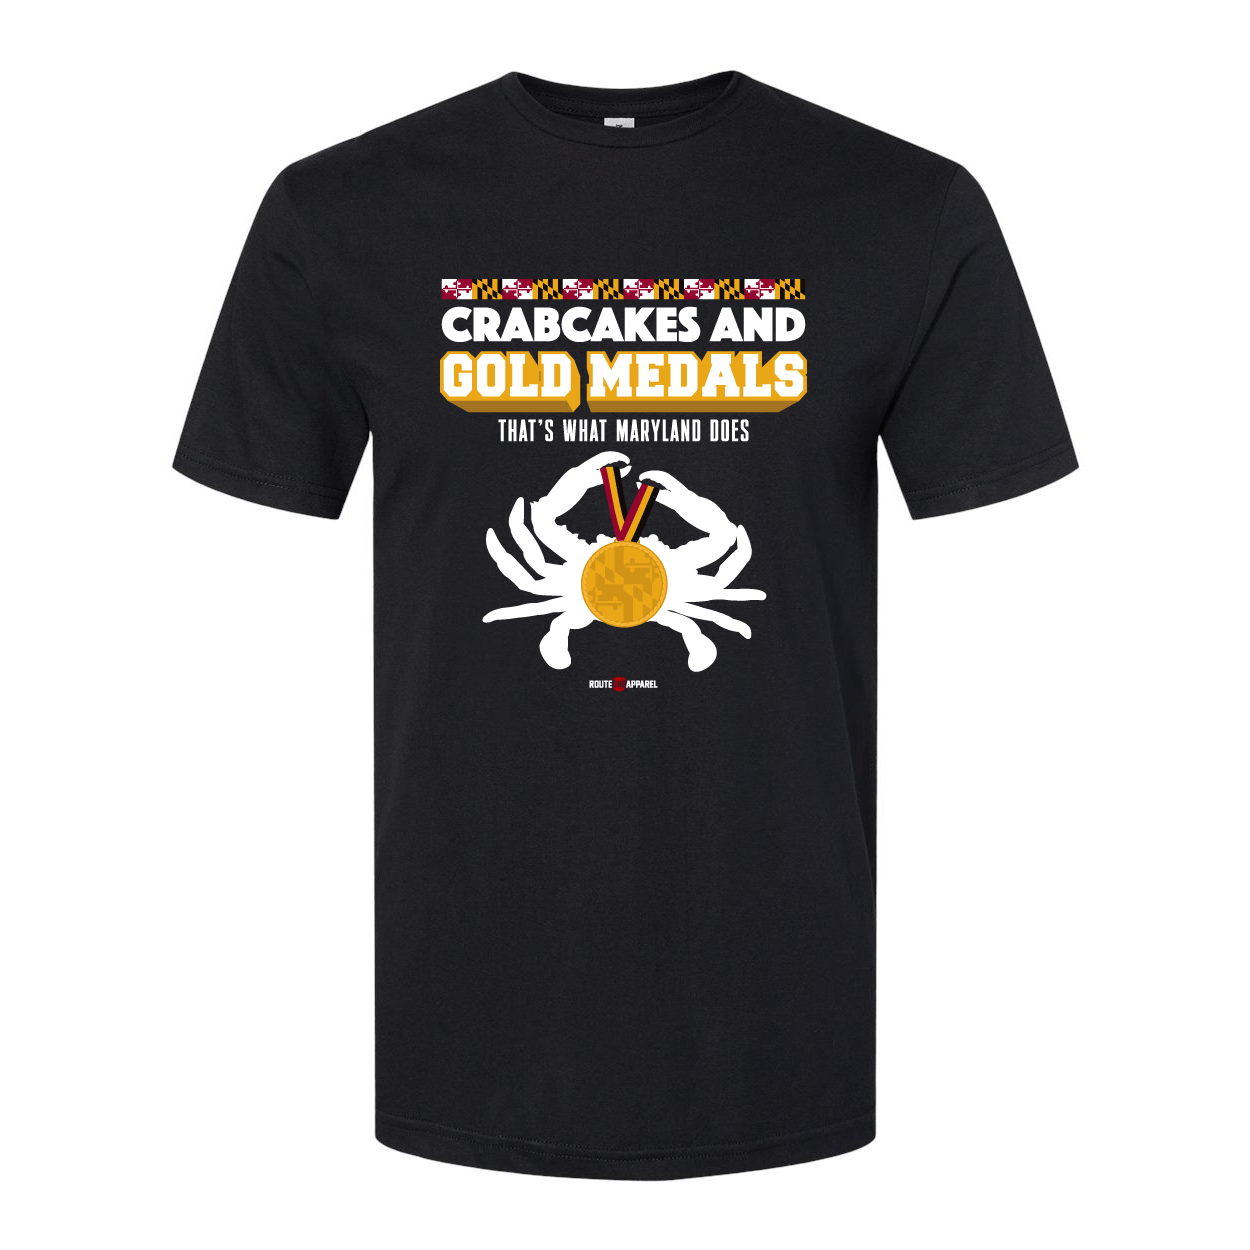 *PRE-ORDER* Crabcakes & Gold Medals (Black) / Shirt (Estimated Ship Date August 6) - Route One Apparel